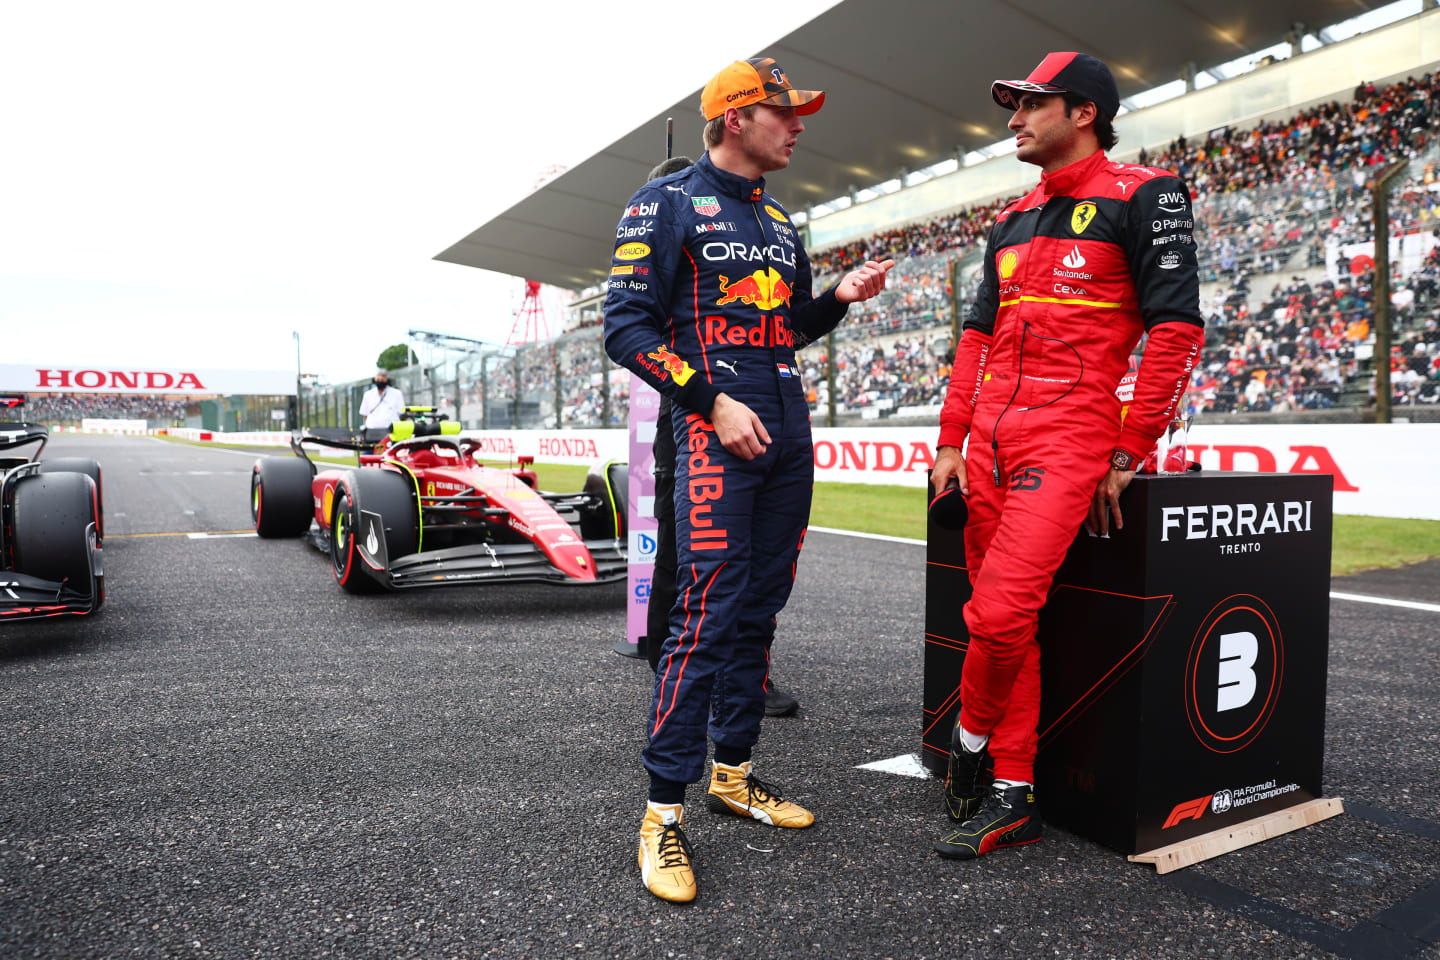 SUZUKA, JAPAN - OCTOBER 08: Pole position qualifier Max Verstappen of the Netherlands and Oracle Red Bull Racing and Third placed qualifier Carlos Sainz of Spain and Ferrari talk in parc ferme during qualifying ahead of the F1 Grand Prix of Japan at Suzuka International Racing Course on October 08, 2022 in Suzuka, Japan. (Photo by Dan Istitene - Formula 1/Formula 1 via Getty Images)